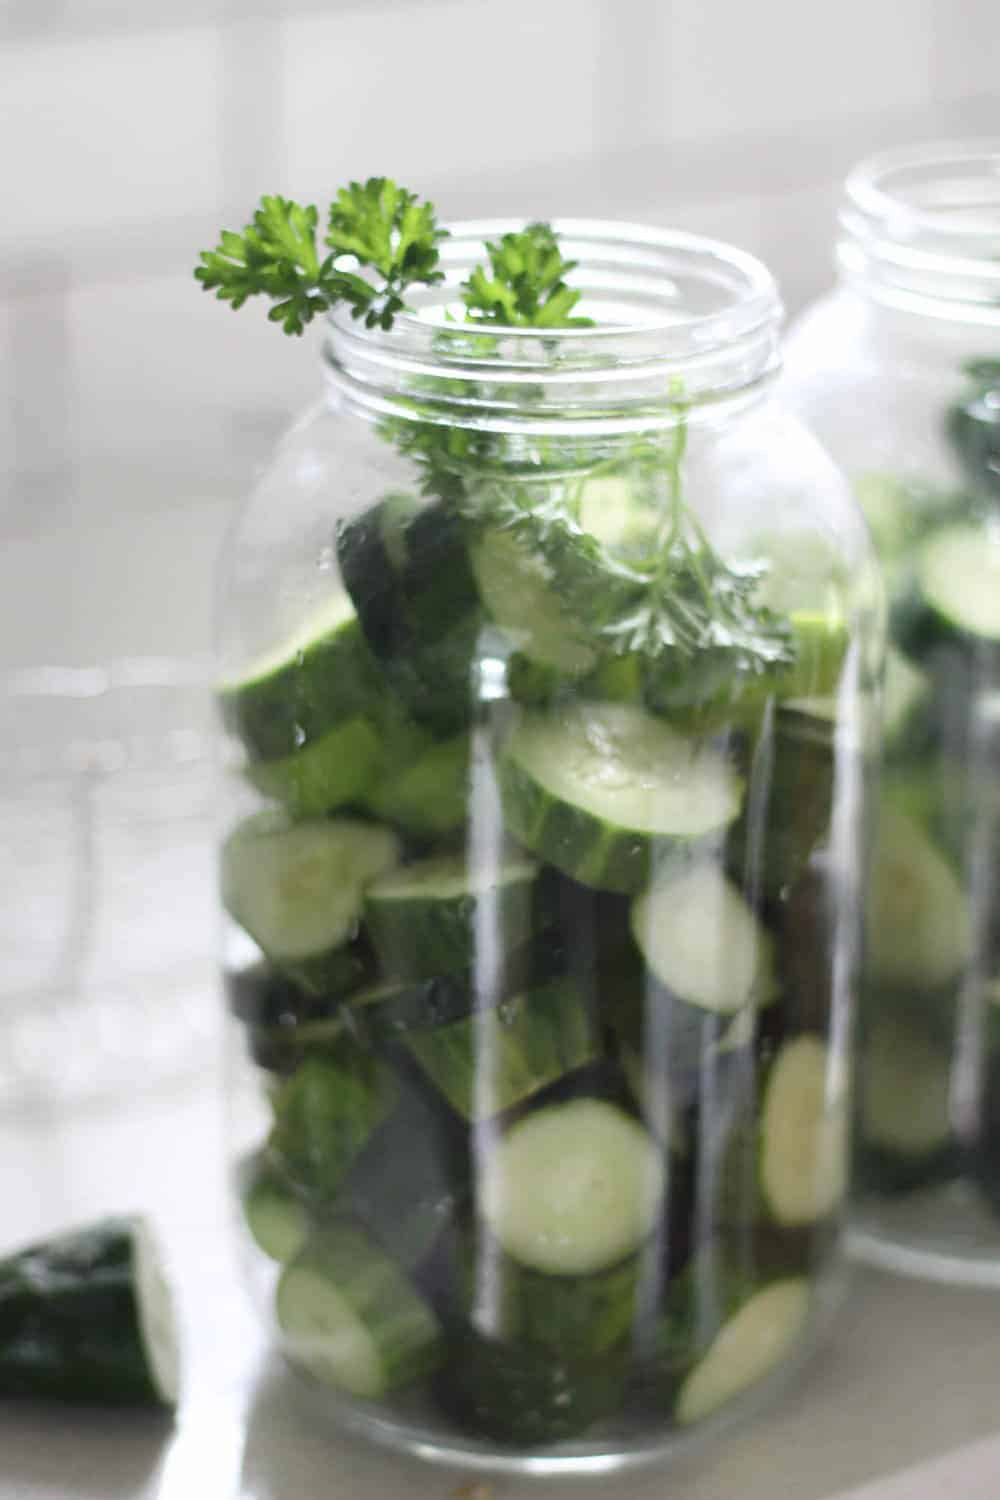 cucumber slices and parsley in a half gallon mason jar on a white countertop with a white backsplash in the background